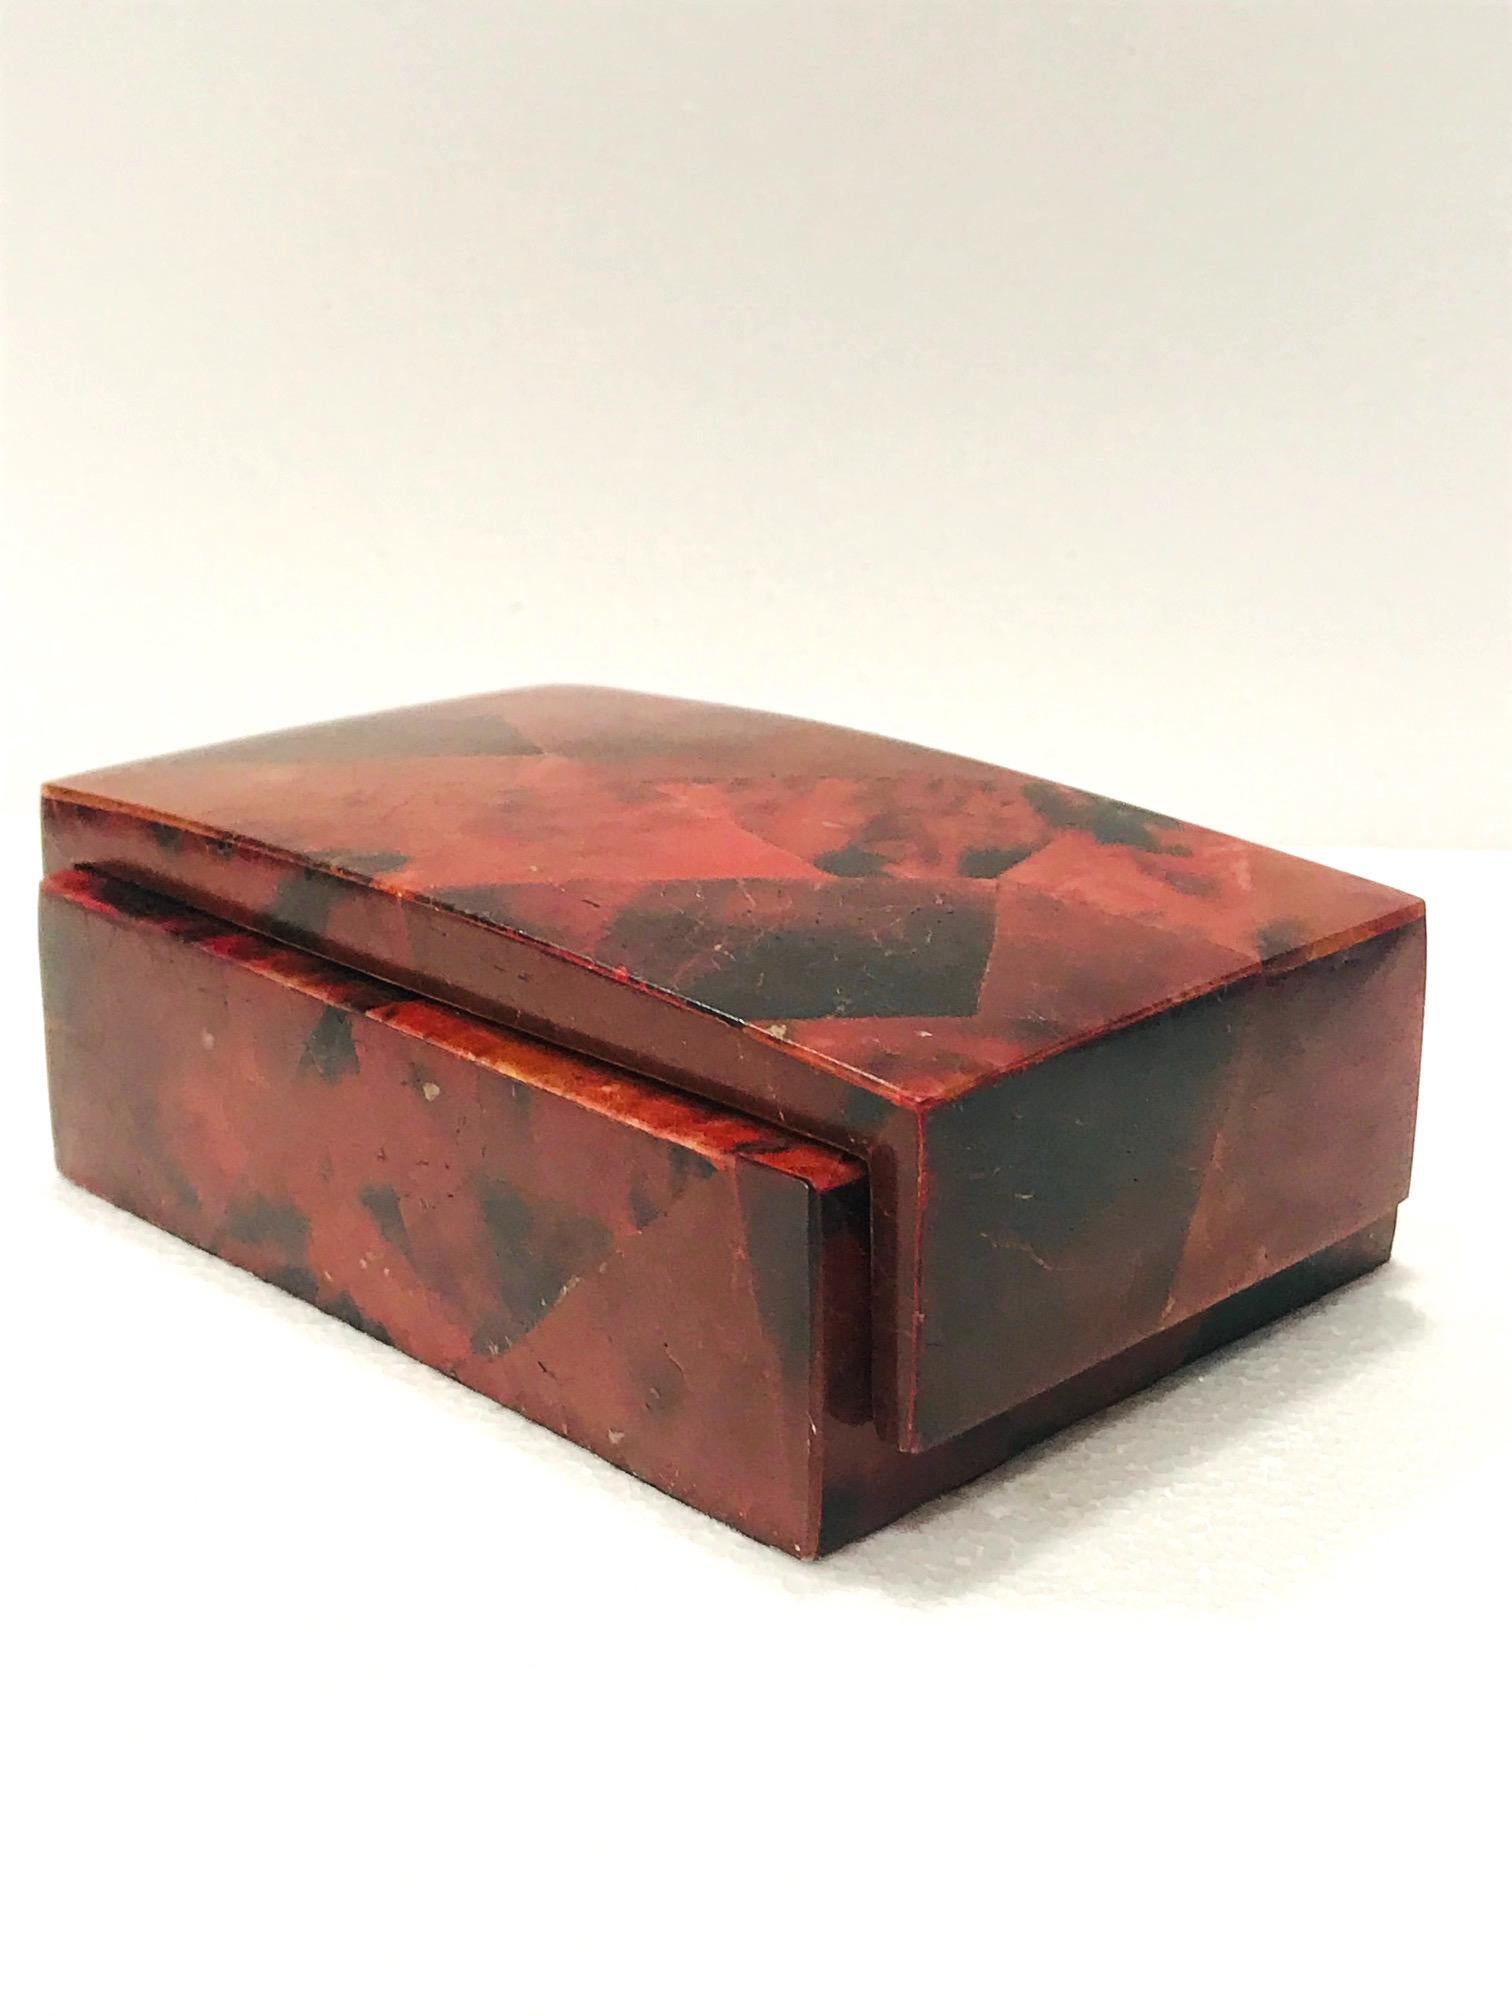 Contemporary Vintage R&Y Augousti Decorative Box in Mosaic Red and Black Pen-Shell, c. 2000